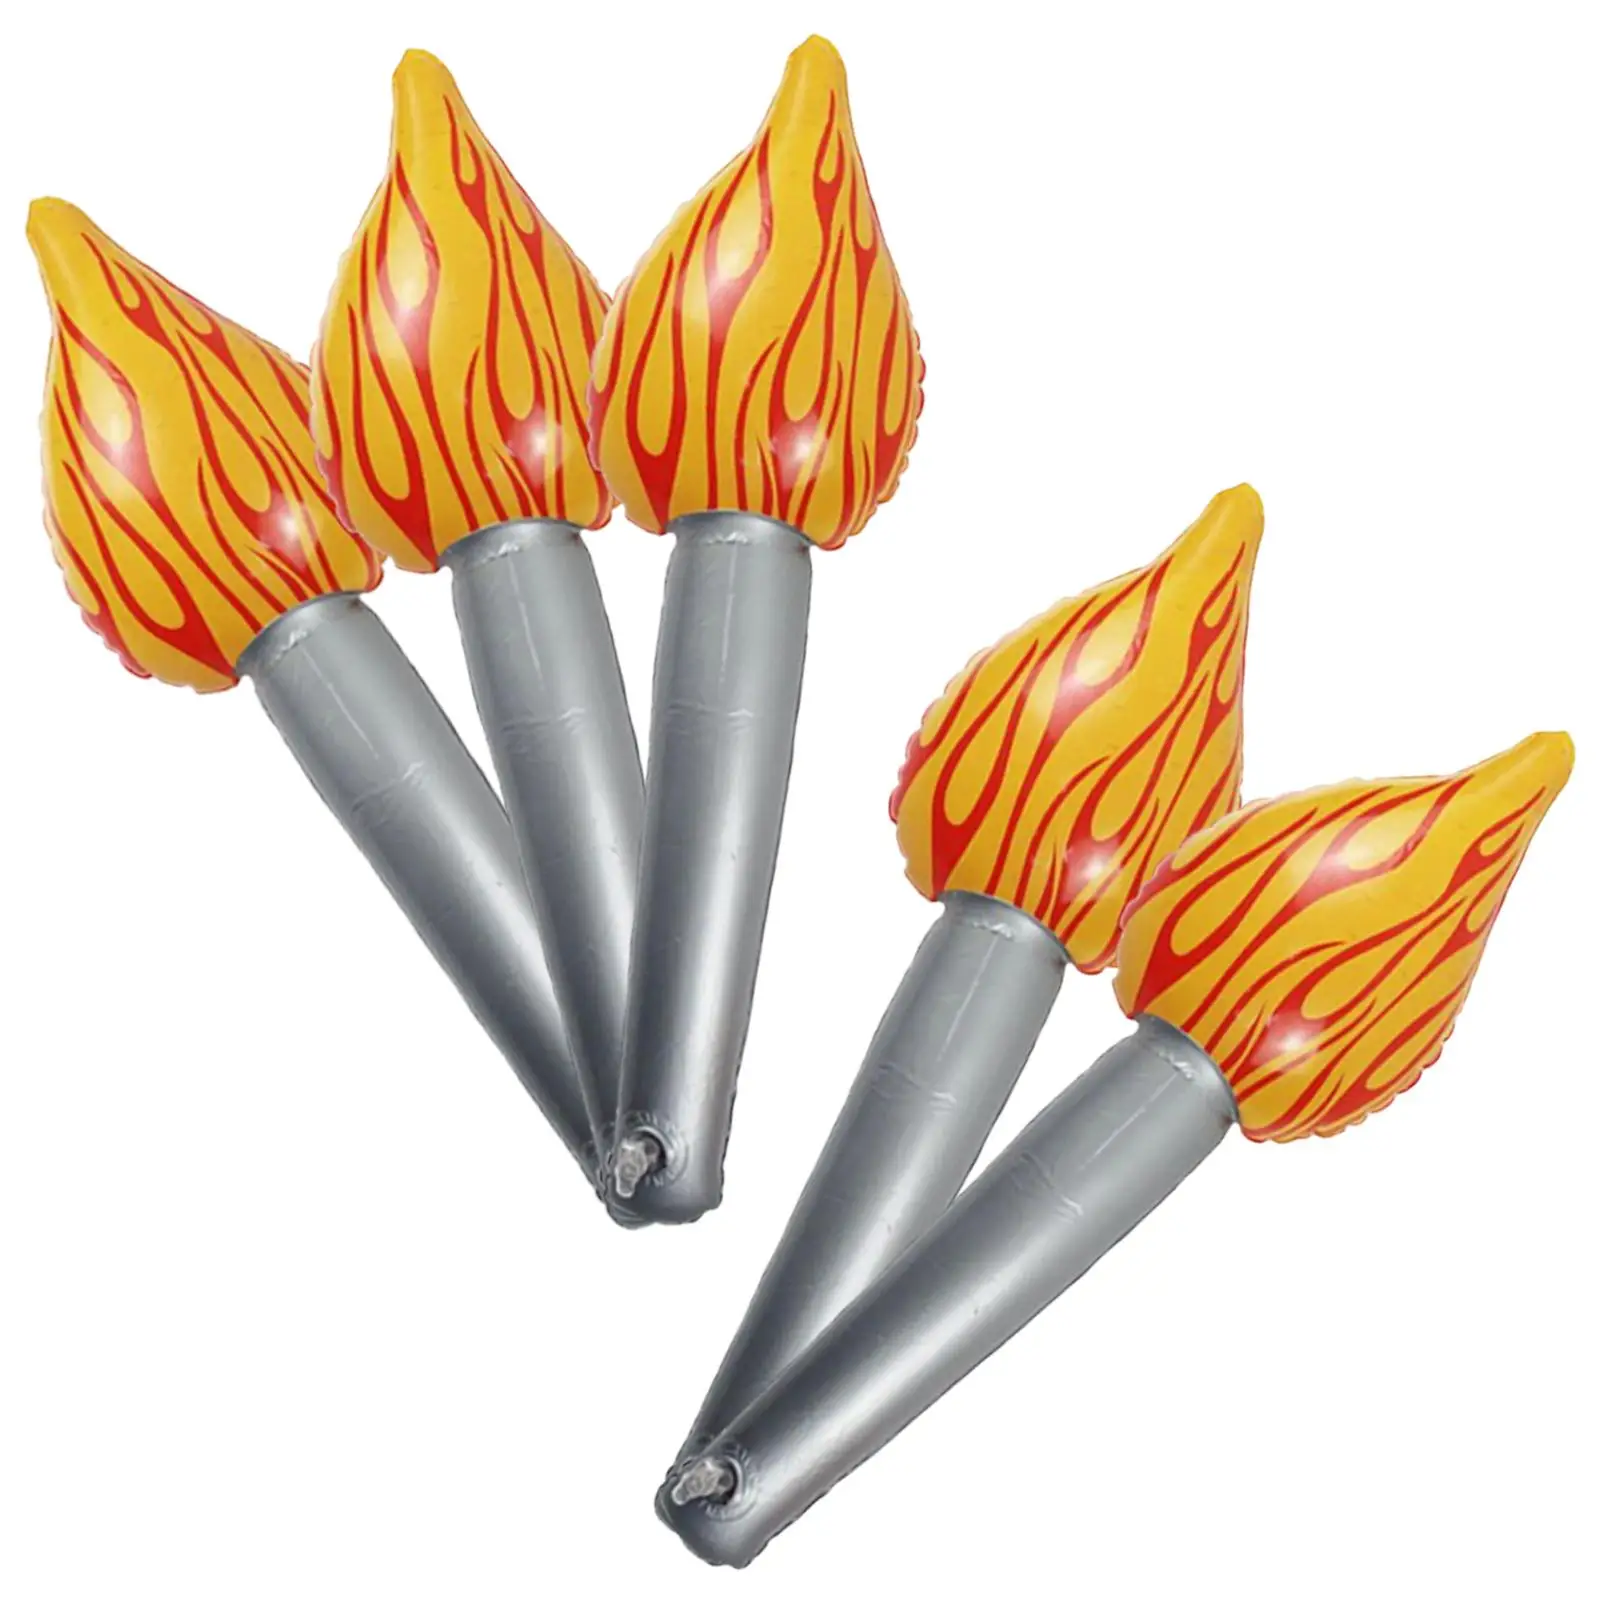 5Pcs Inflatable Flame fun Torch Balloon for Theme Party Activities Wedding Decor